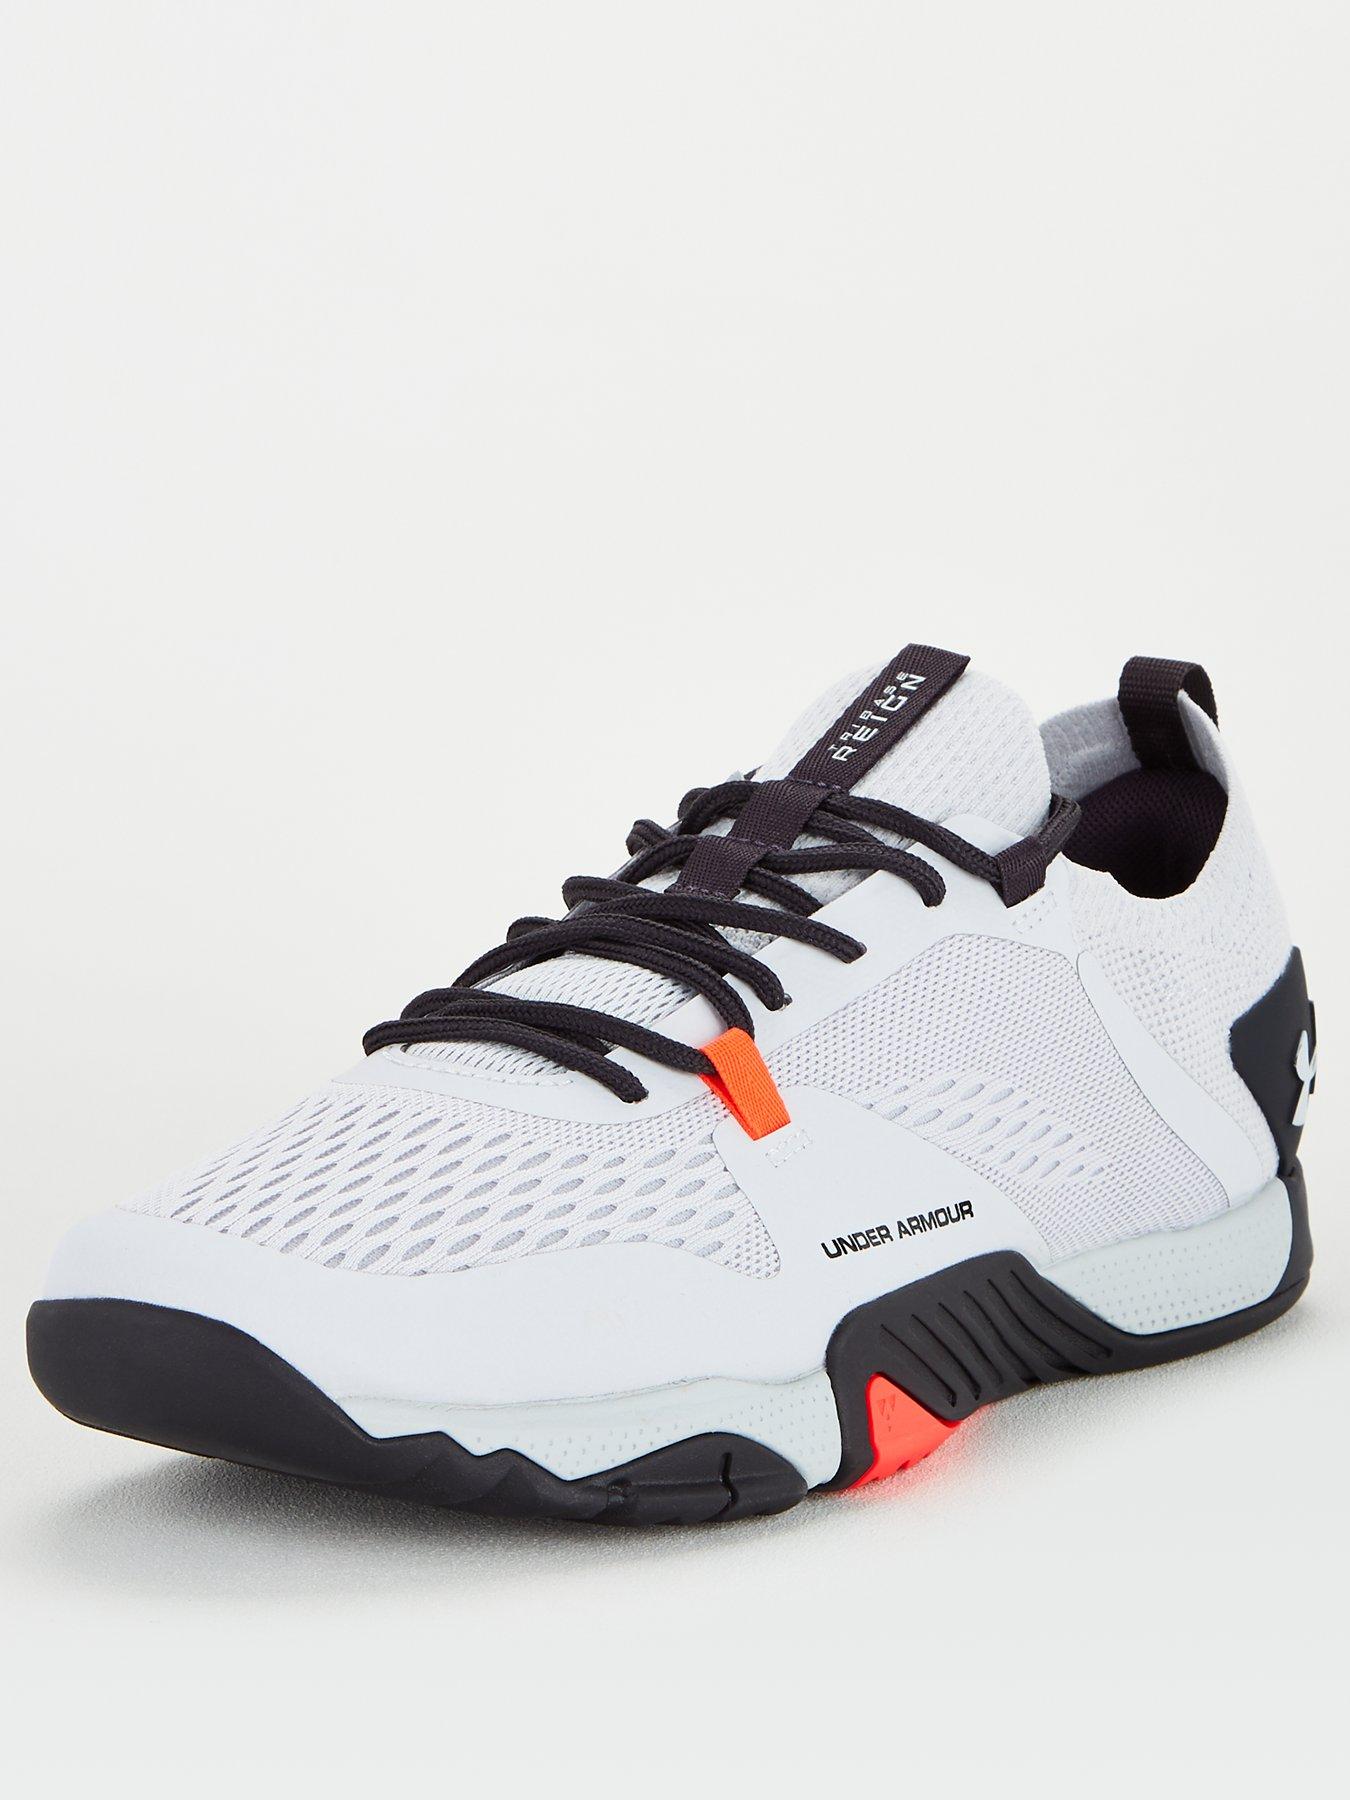 Sports Trainers | Mens trainers | Mens 